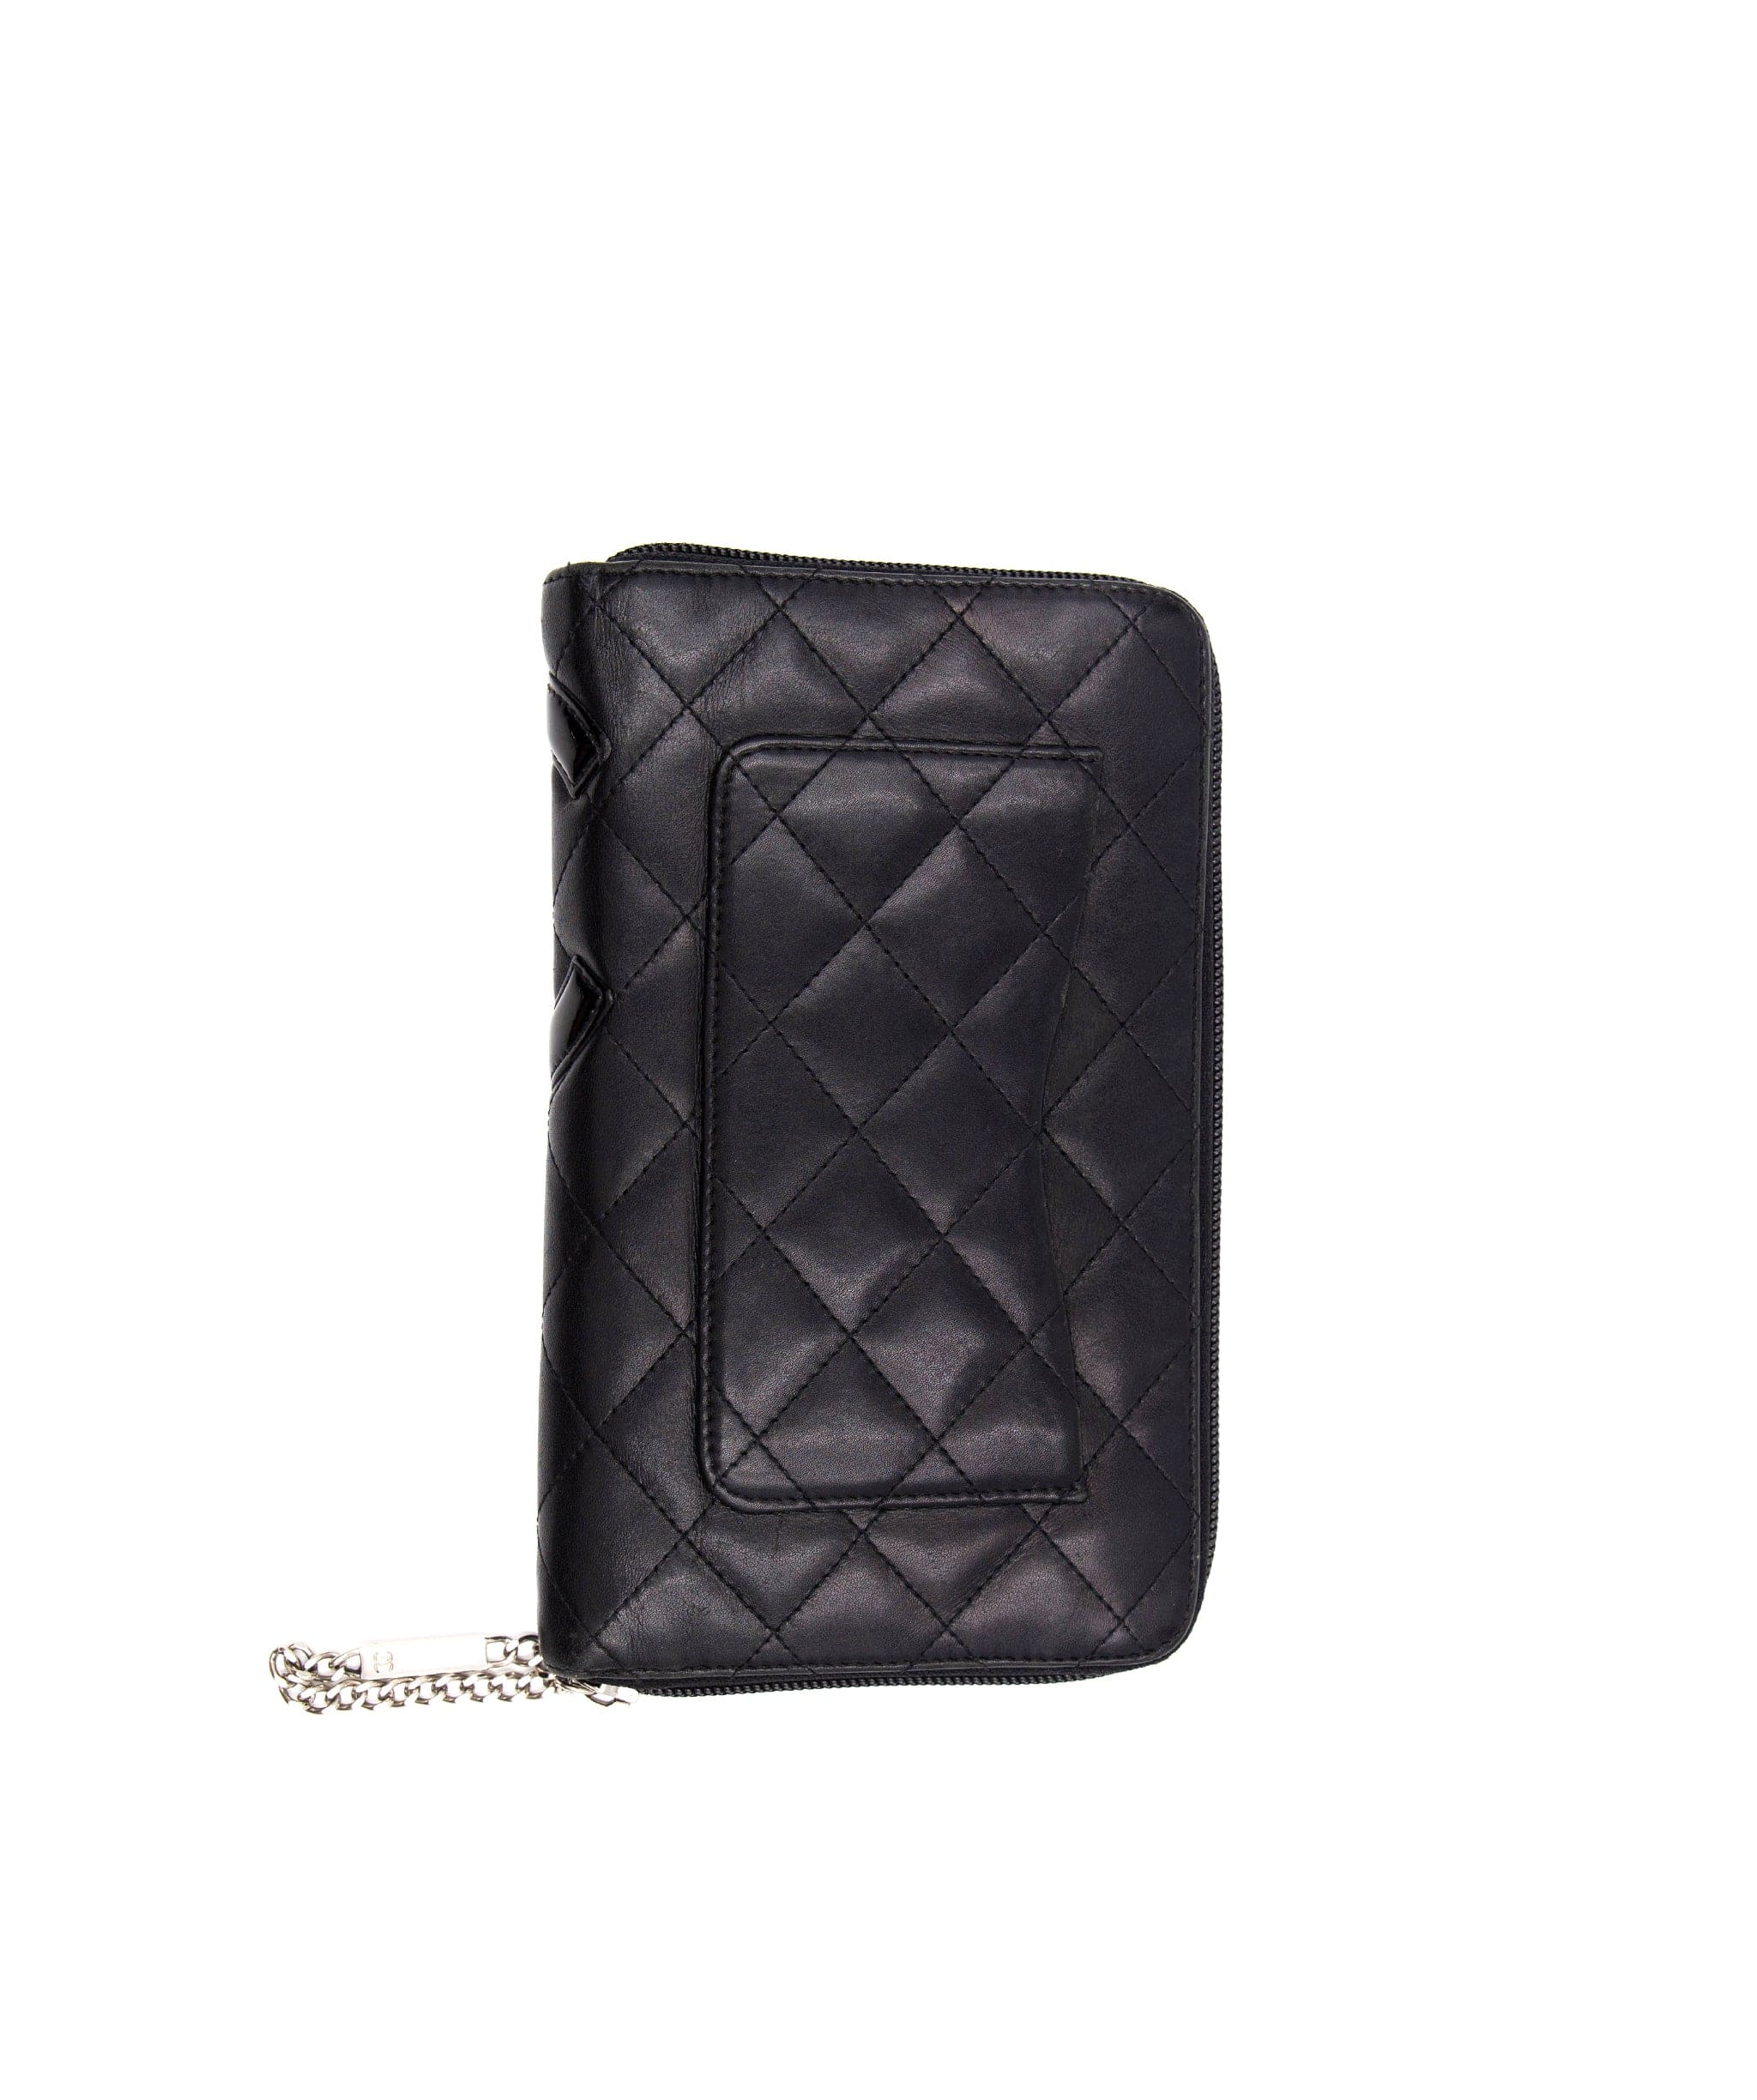 Chanel Chanel Black Leather Cambon Wallet AGC1155